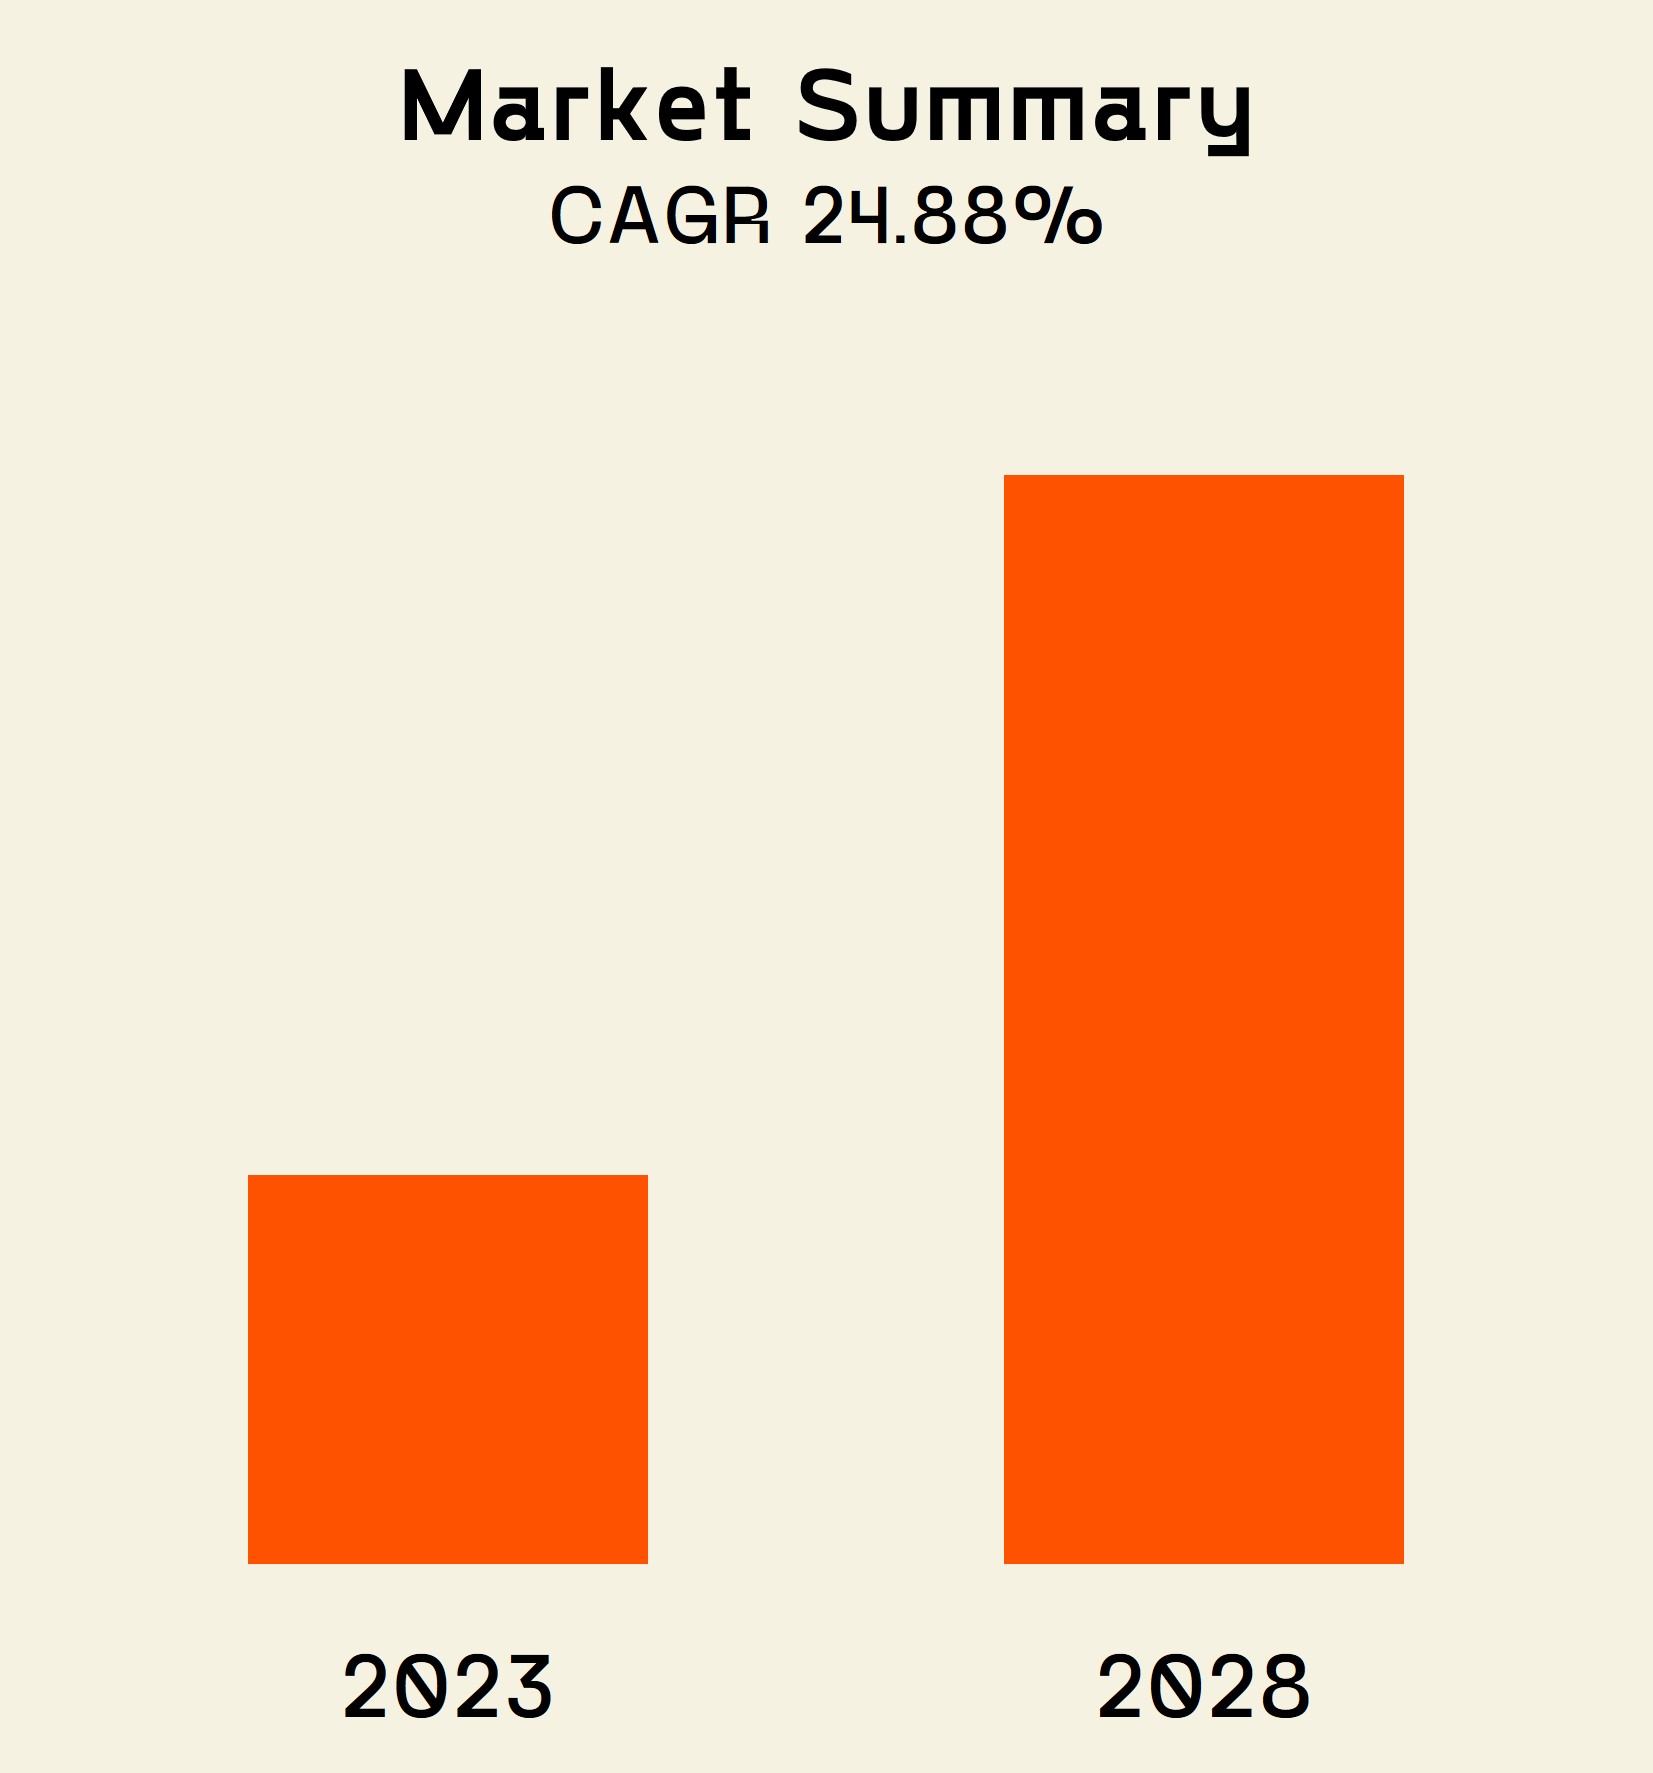 Graph with orange bars that show the growth in Gamification marketing size from 2023 to 2028.